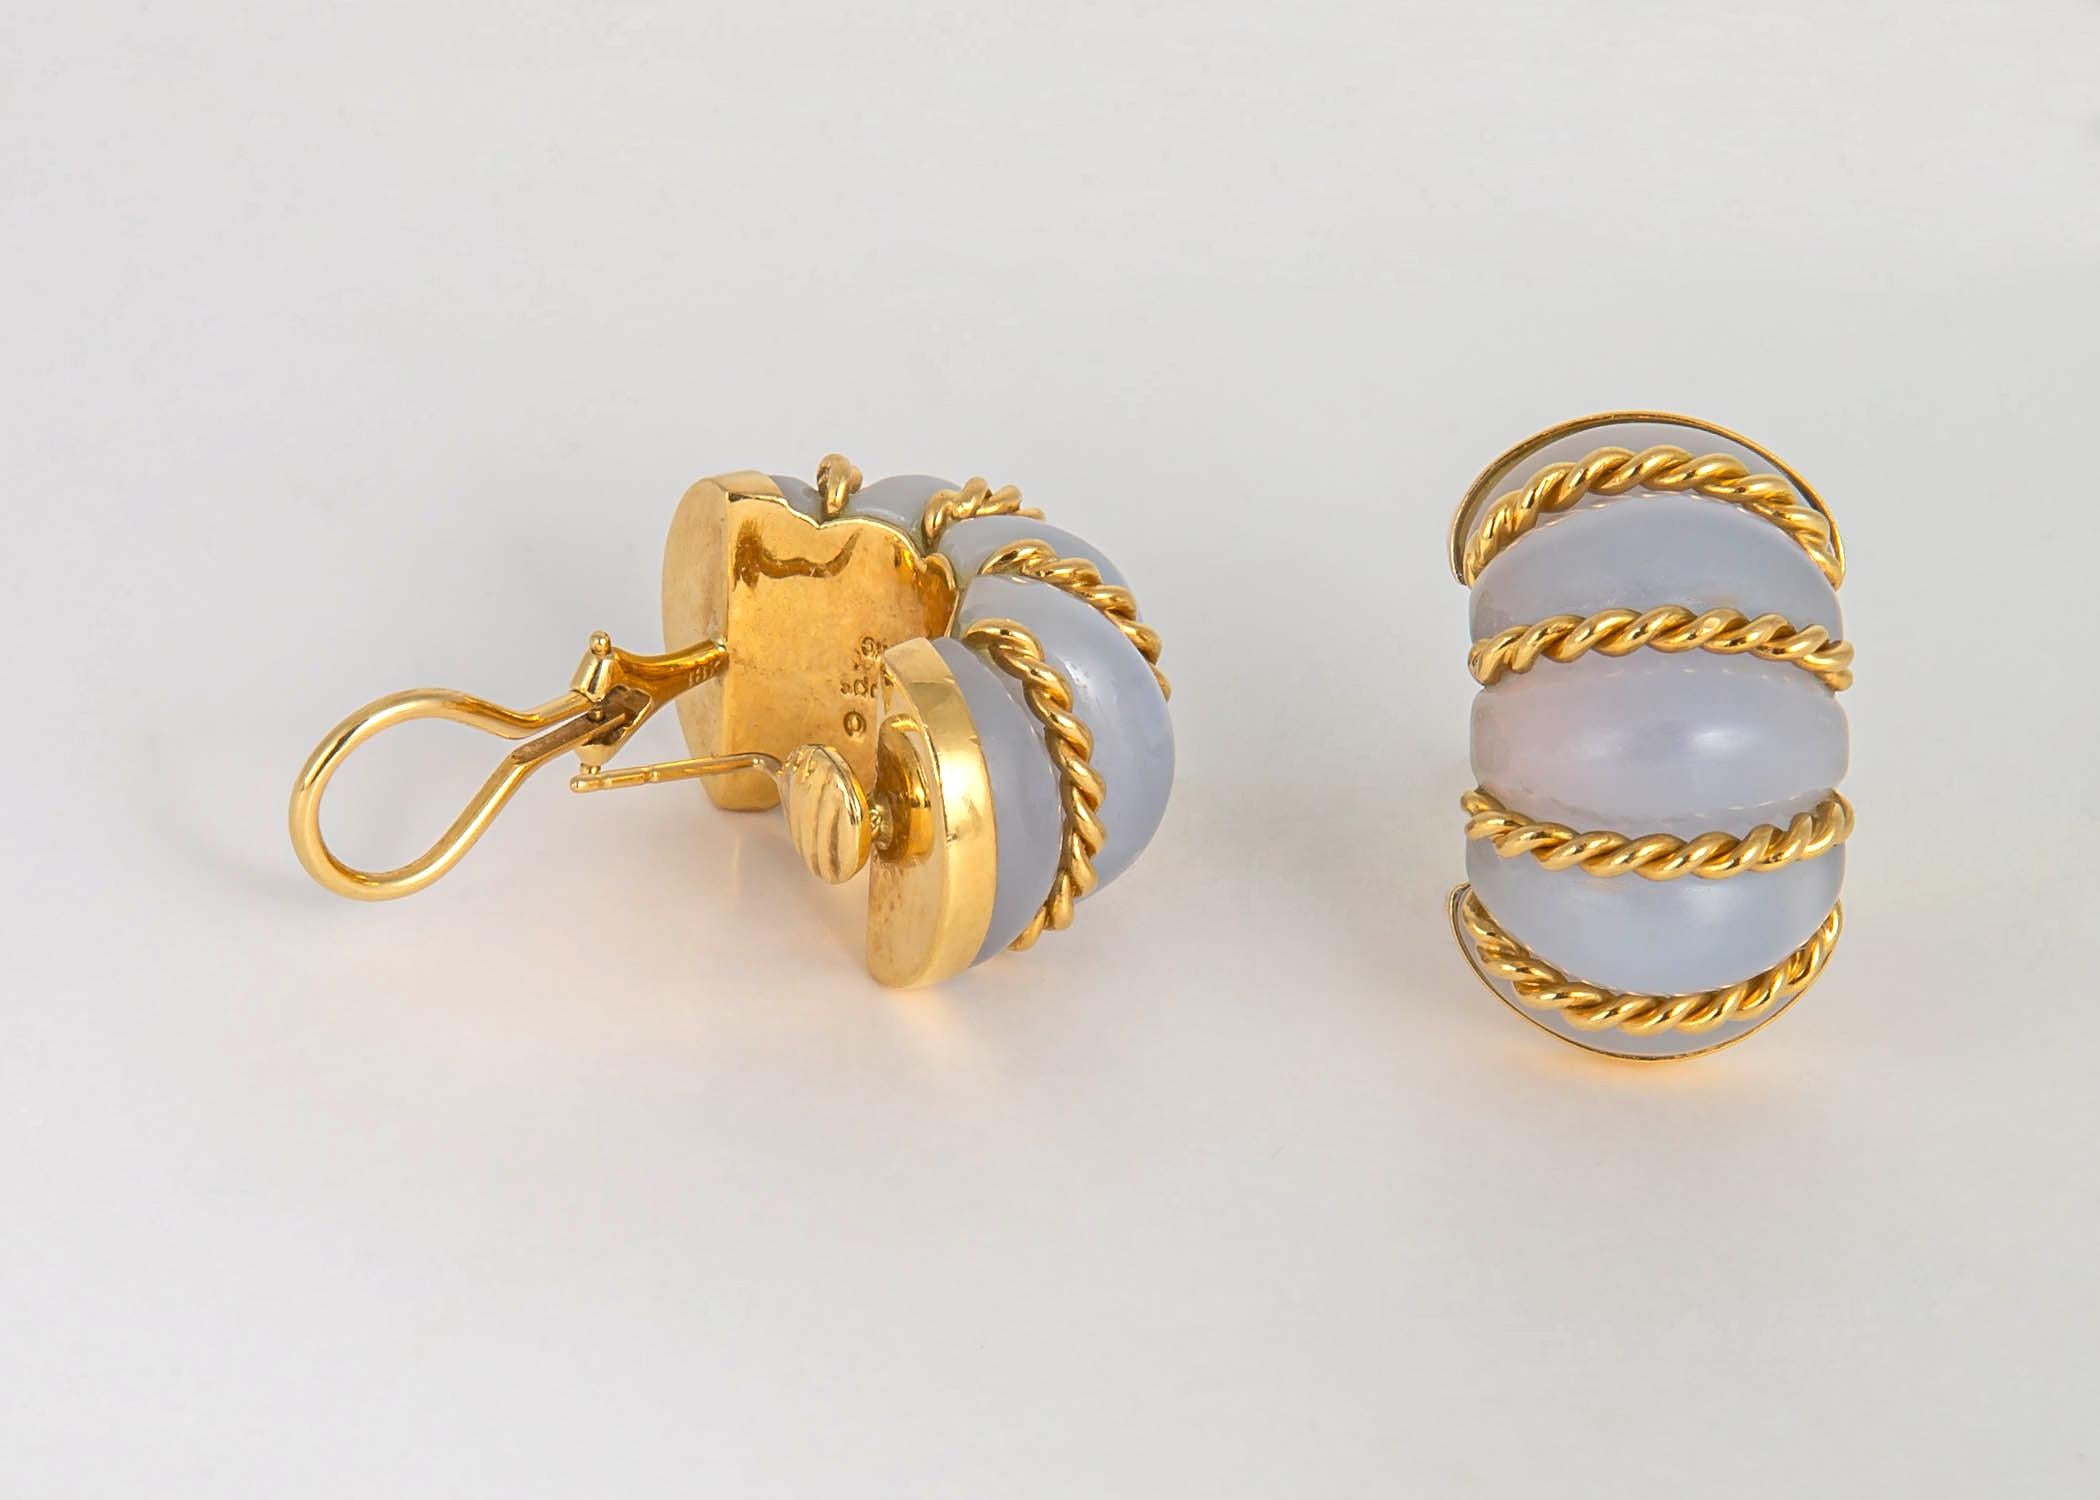 Seaman Schepp's shrimp design earrings are a true classic. This pair features chalcedony. The soft unique color has been used in fine jewelry for many decades. Approximately 1 inch in length.